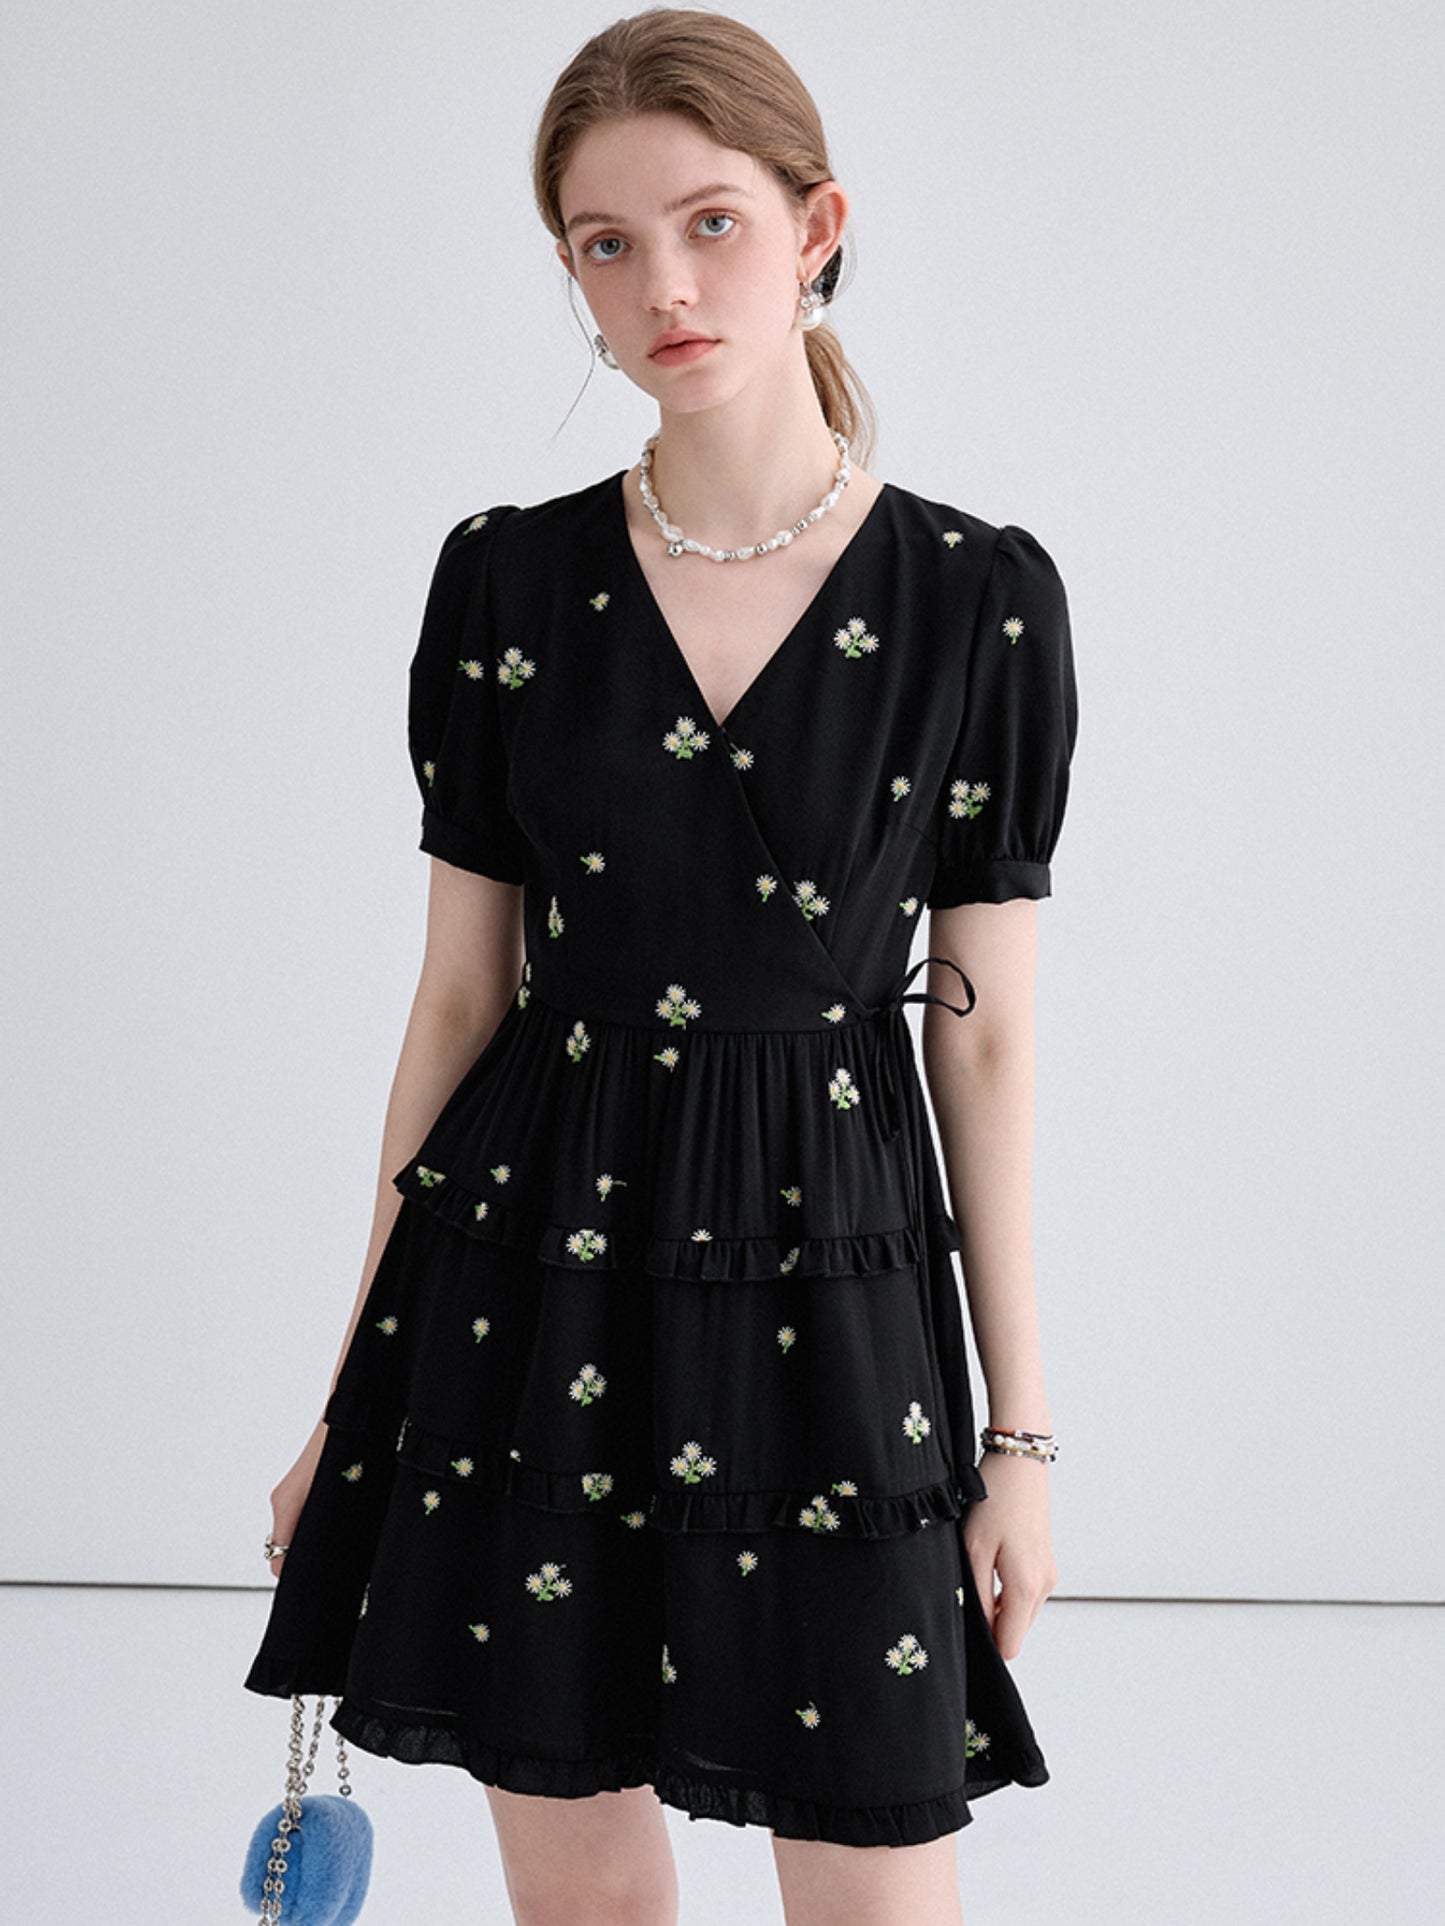 French Embroidered Black Dress